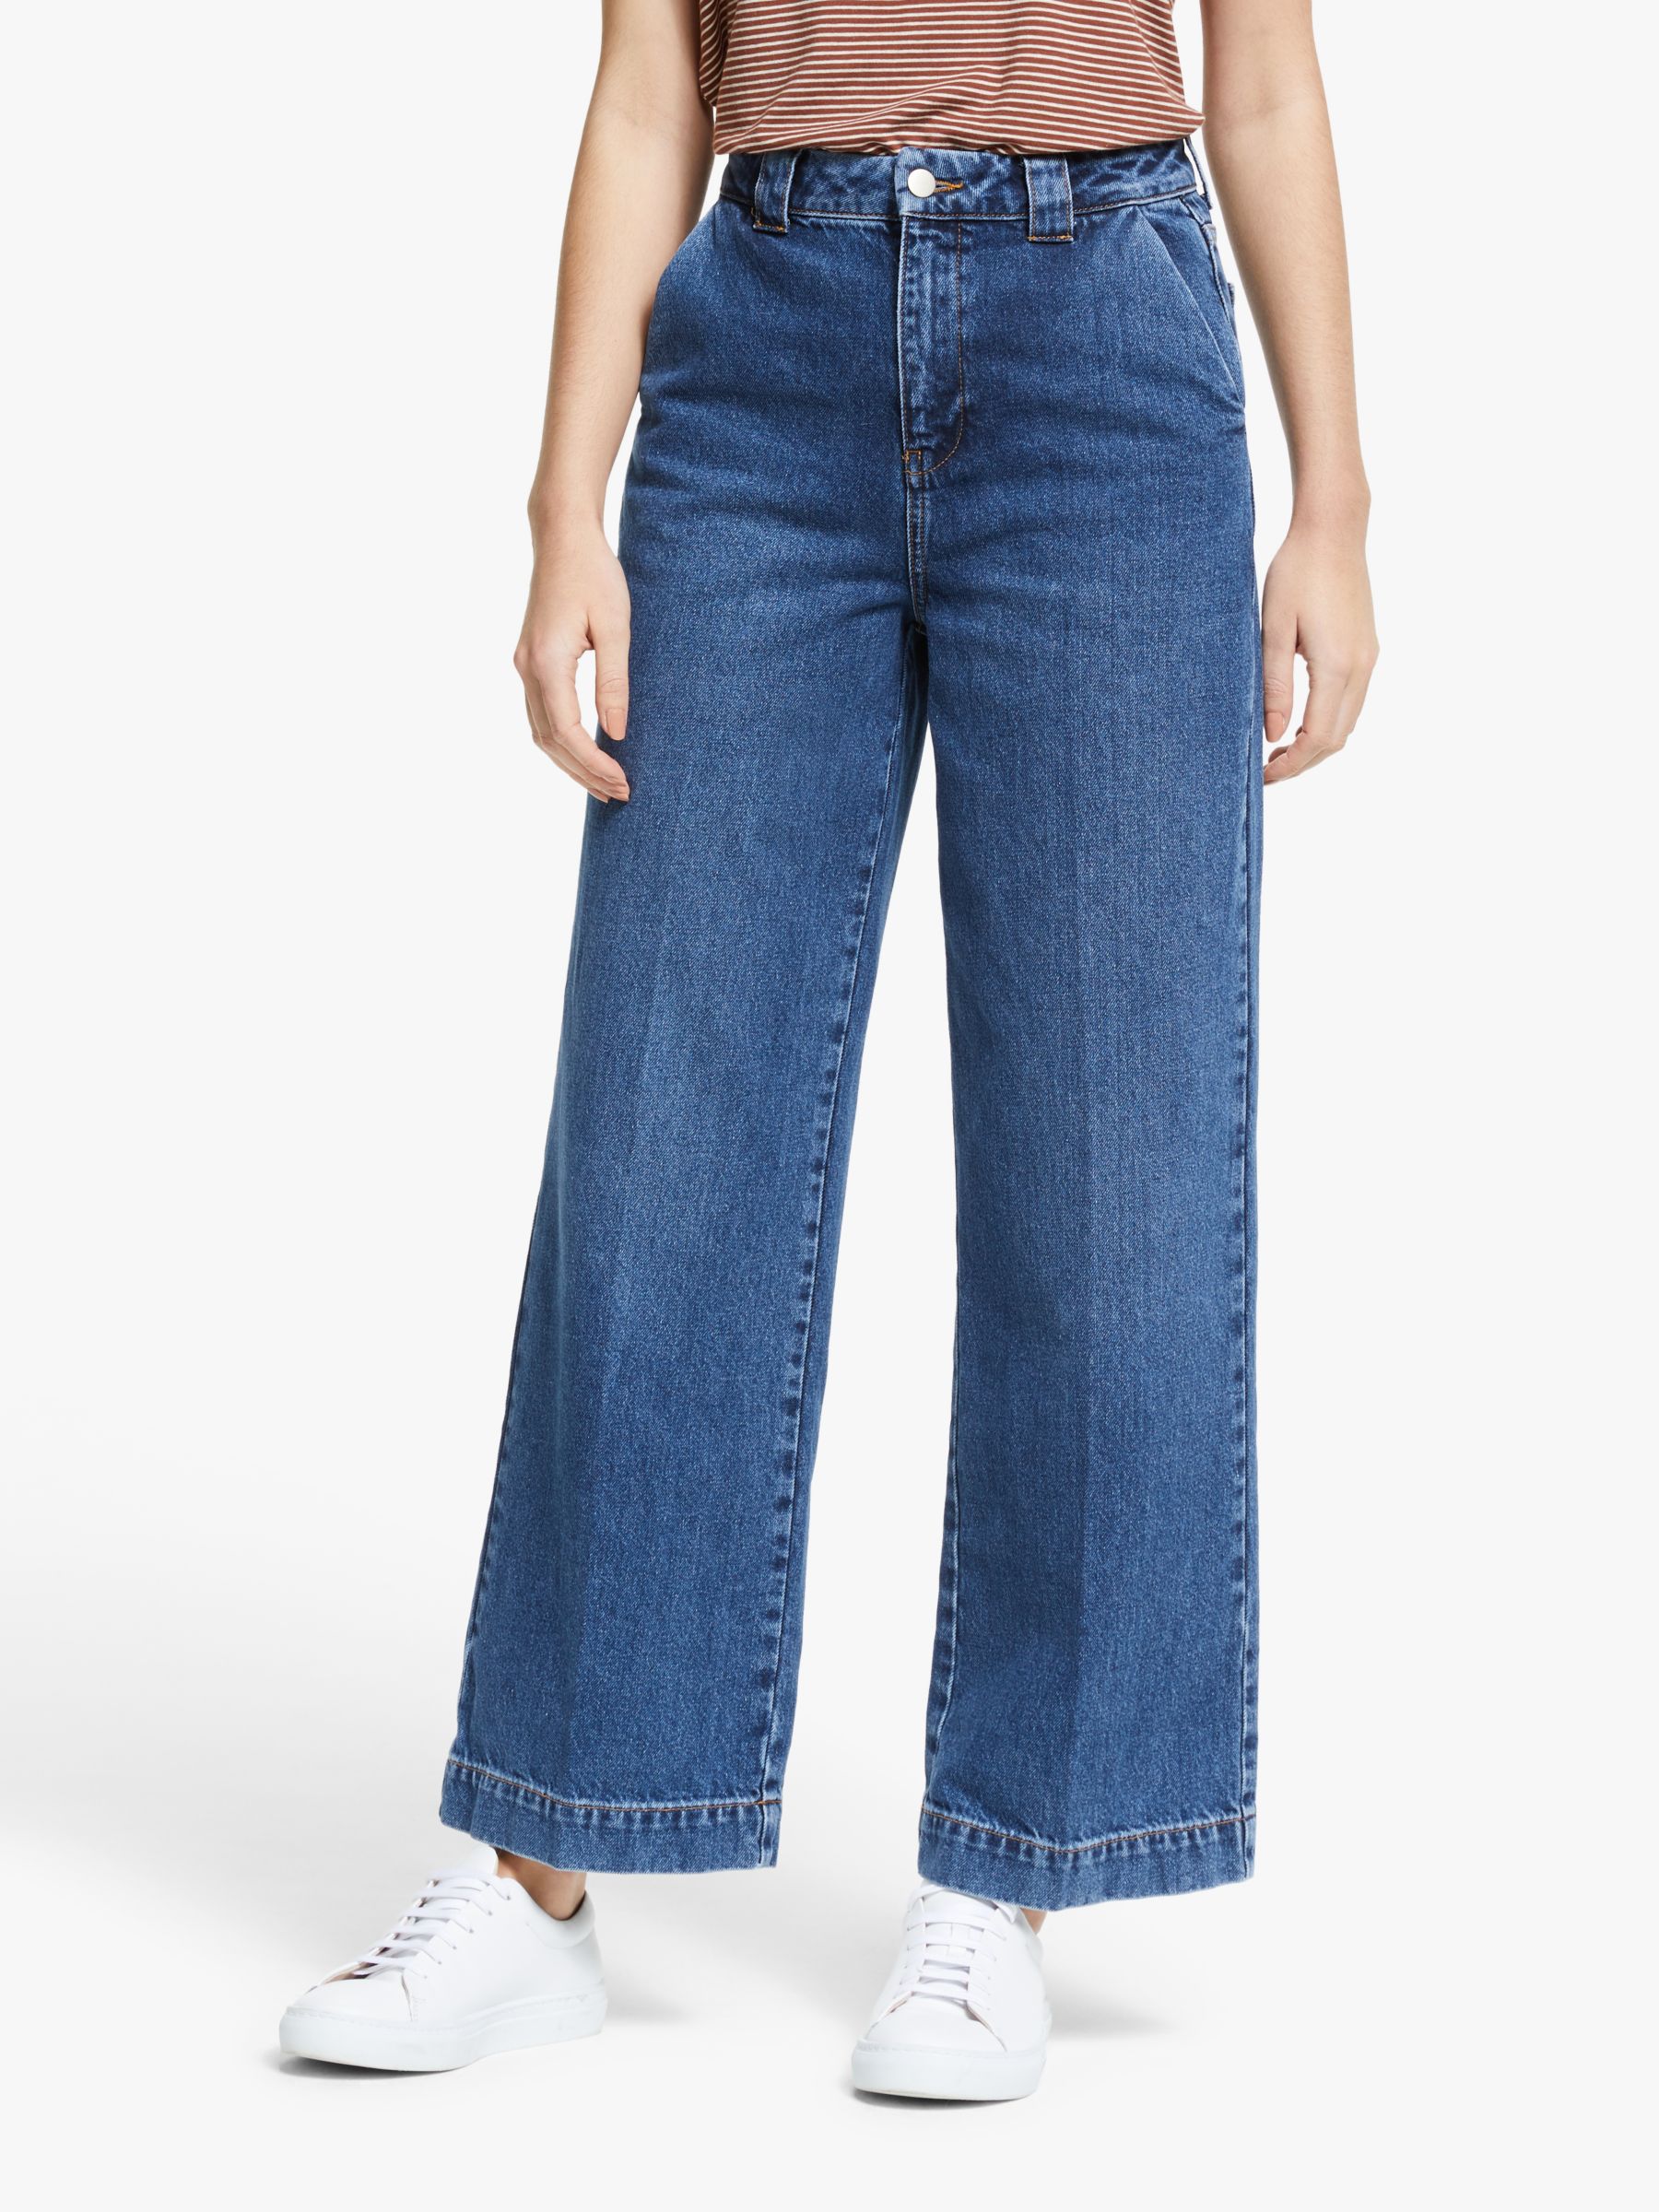 tailored jeans online